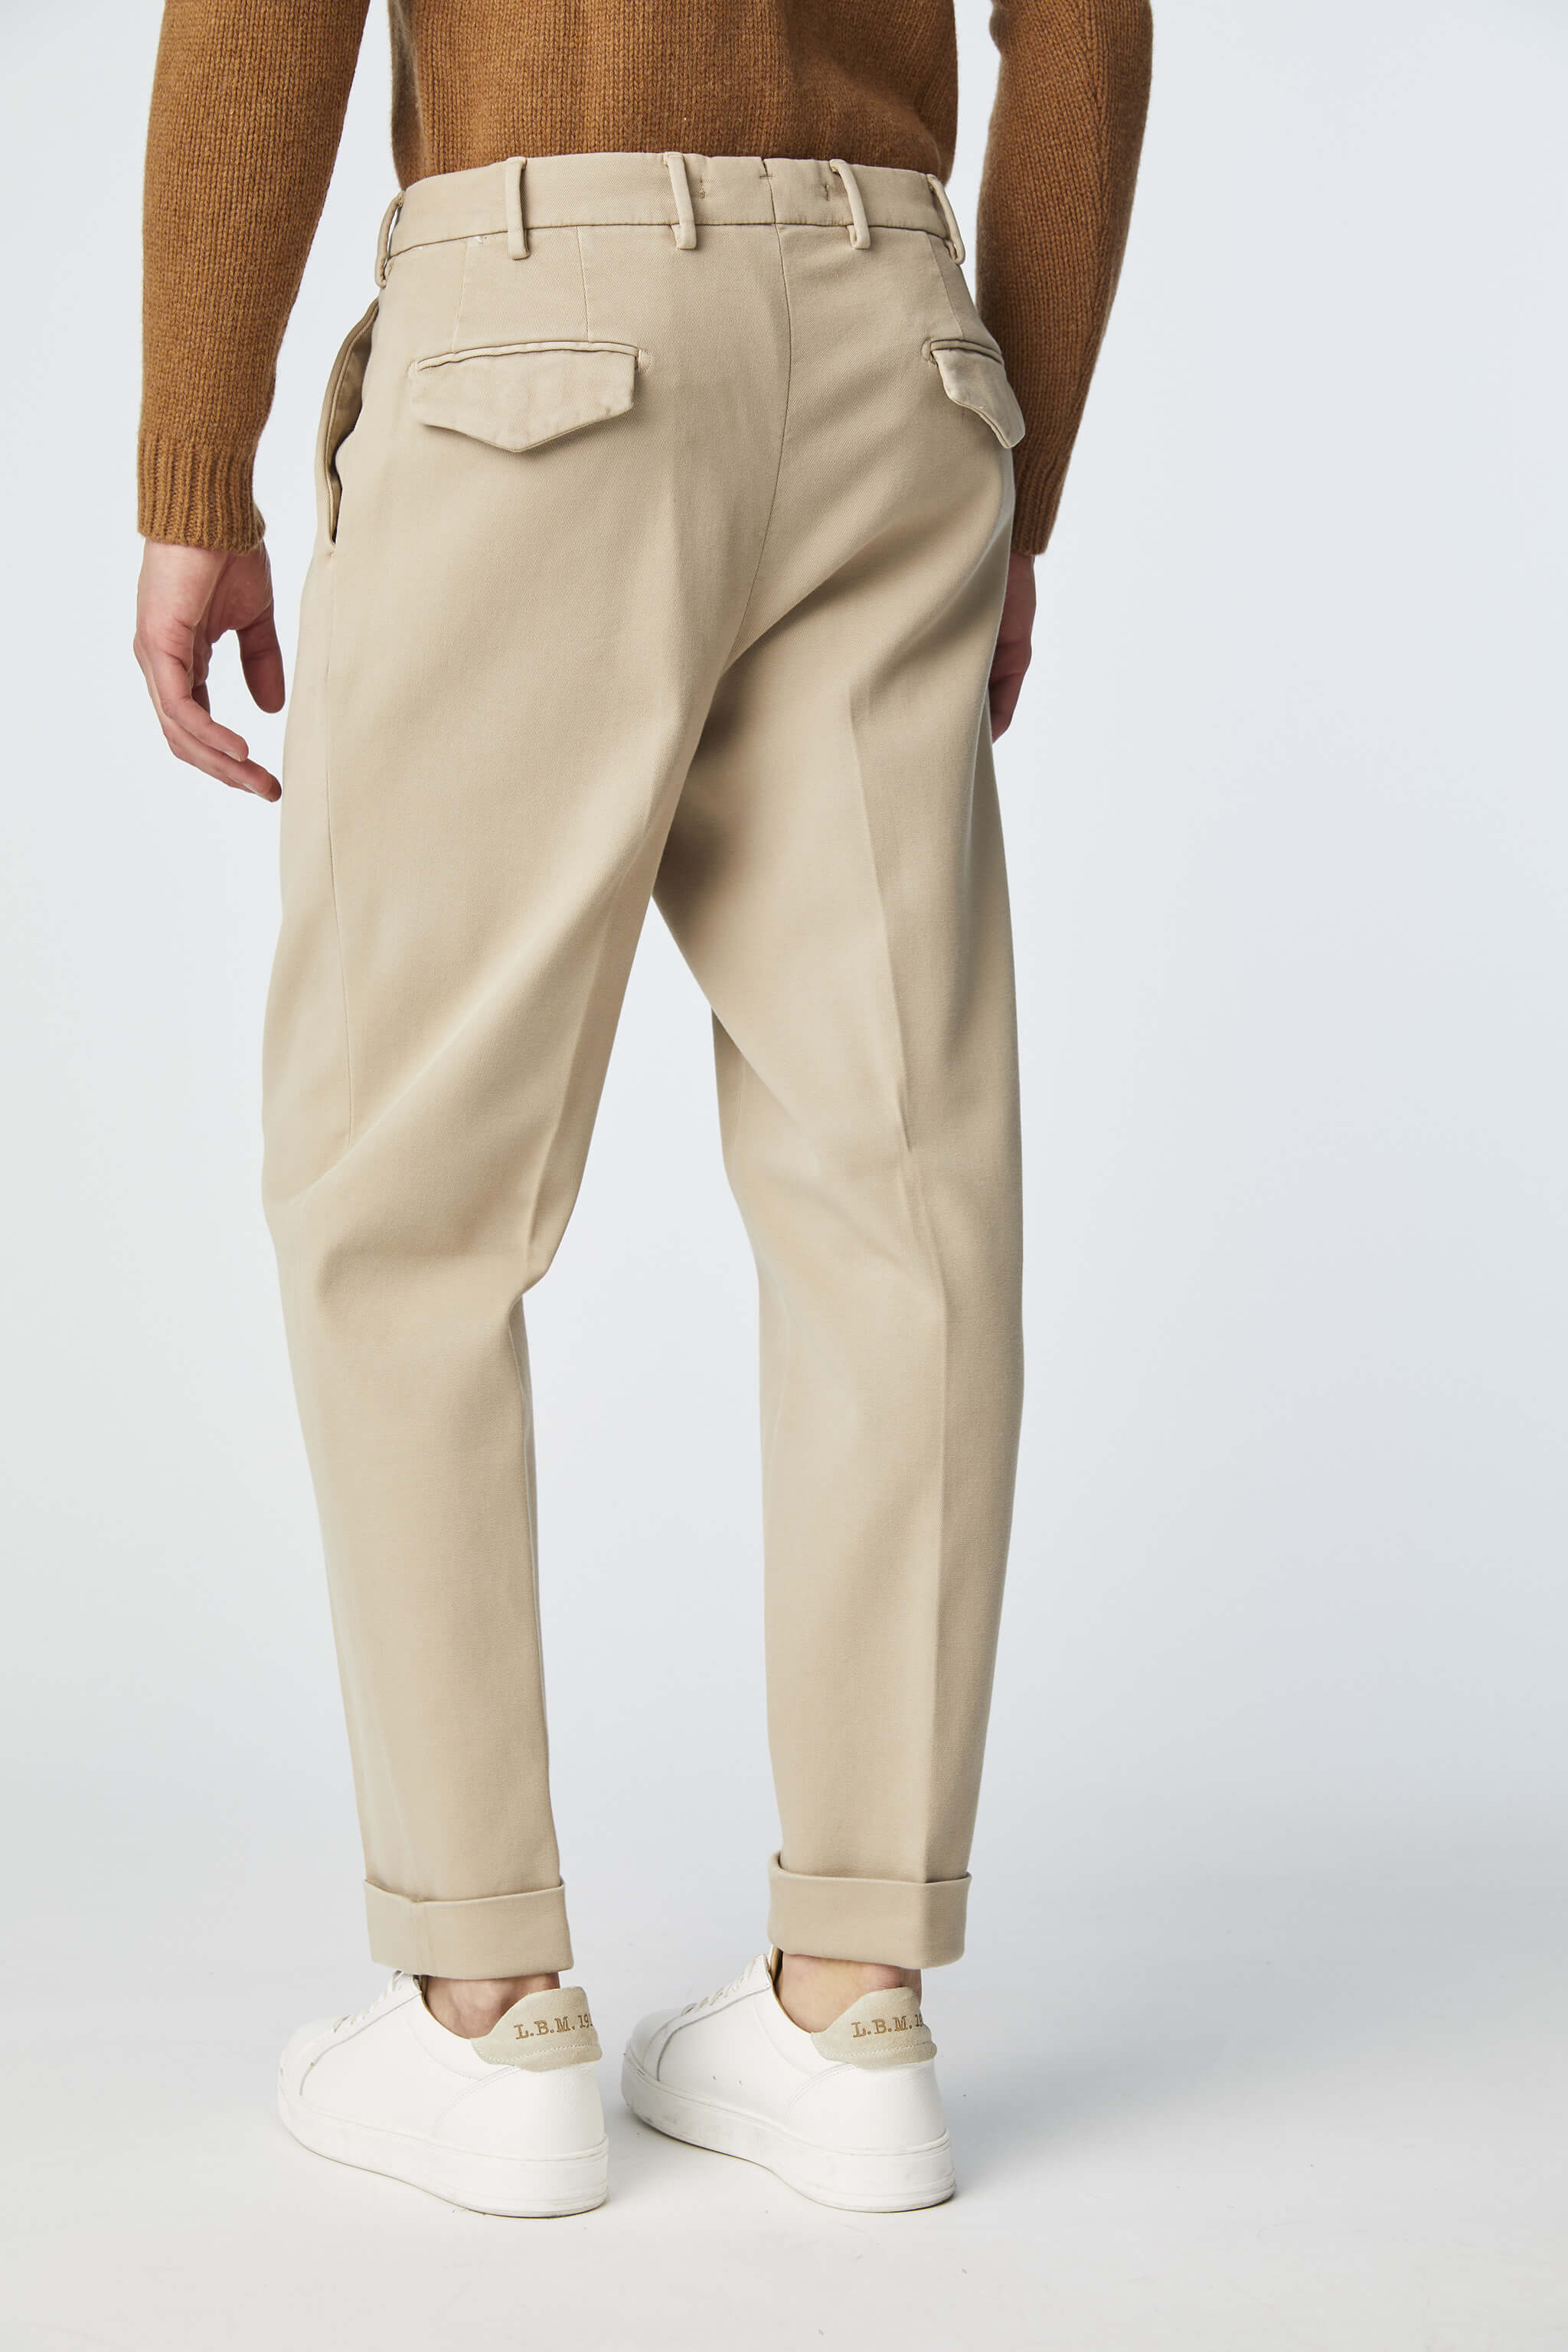 Garment-dyed MILES pants in beige